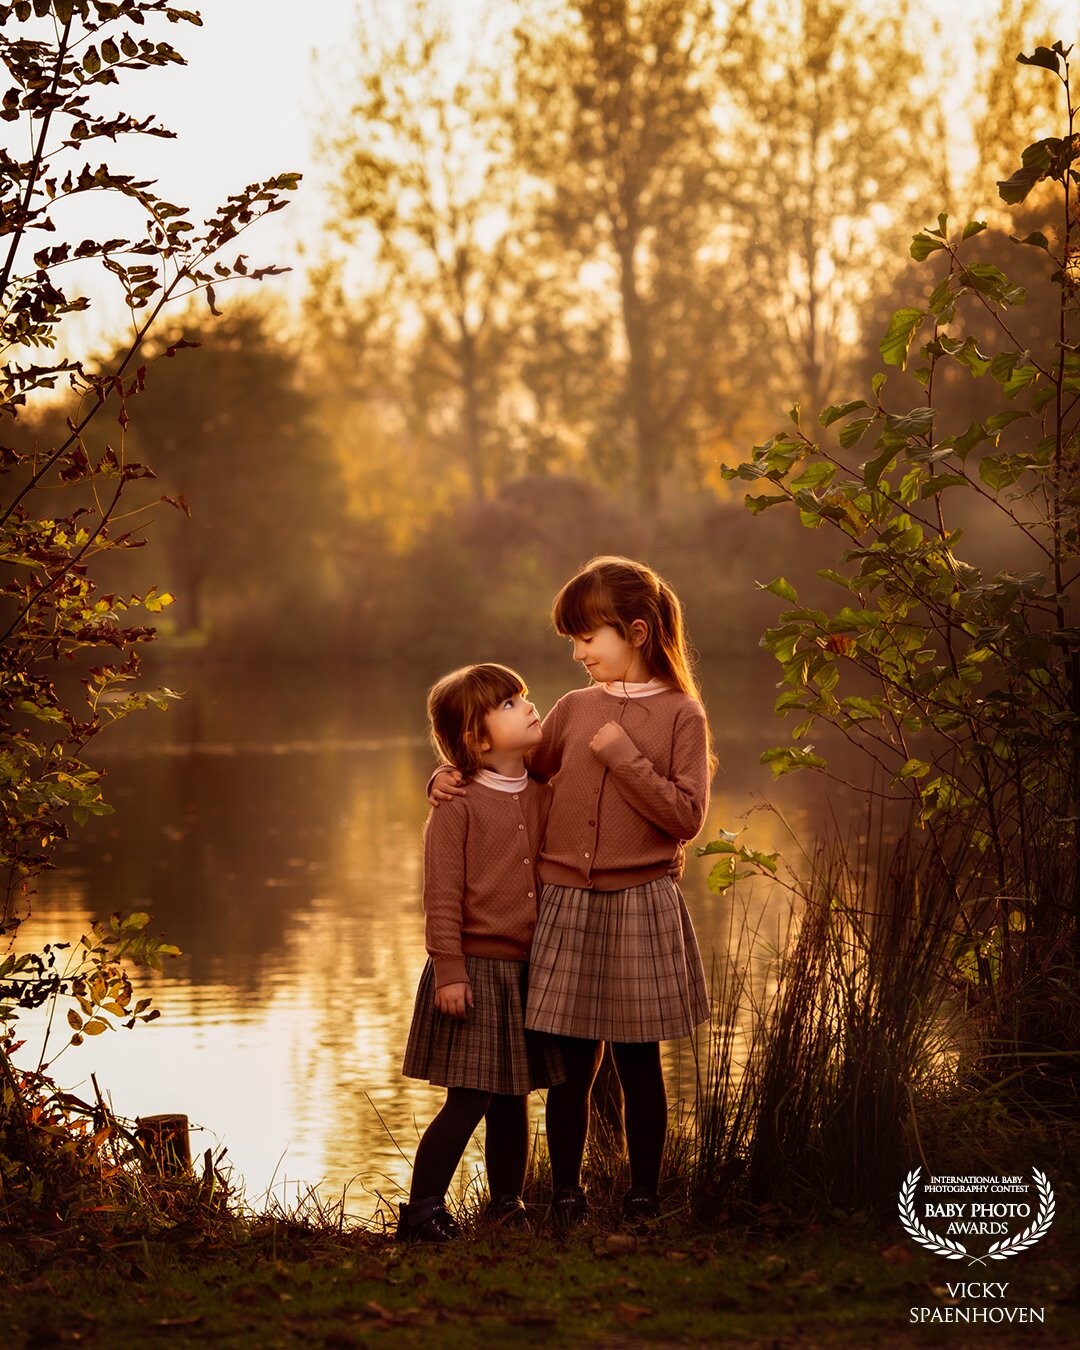 These two, my girls ;-). They are six and three years old. It was a beautiful autumn evening, so we've captured that beautiful light and their connection. It's such a magical image for me. Thank you for chosing this one.